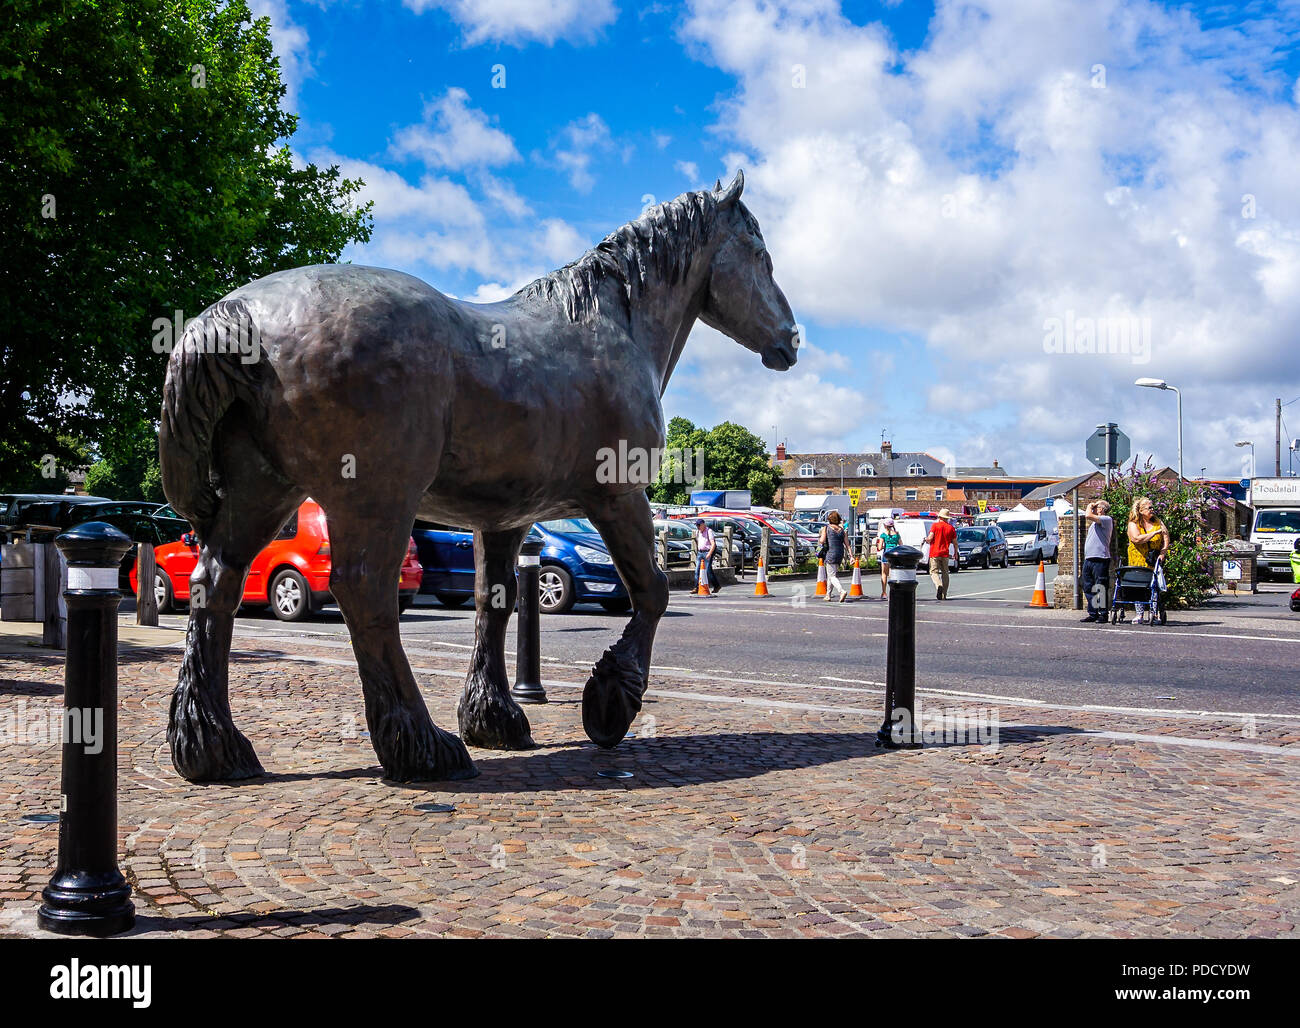 Shire Horse statue at entrance to town centre regeneration of Eldridge Pope Brewery Site - Brewery Square, Dorchester, Dorset, UK on 8 August 2018 Stock Photo